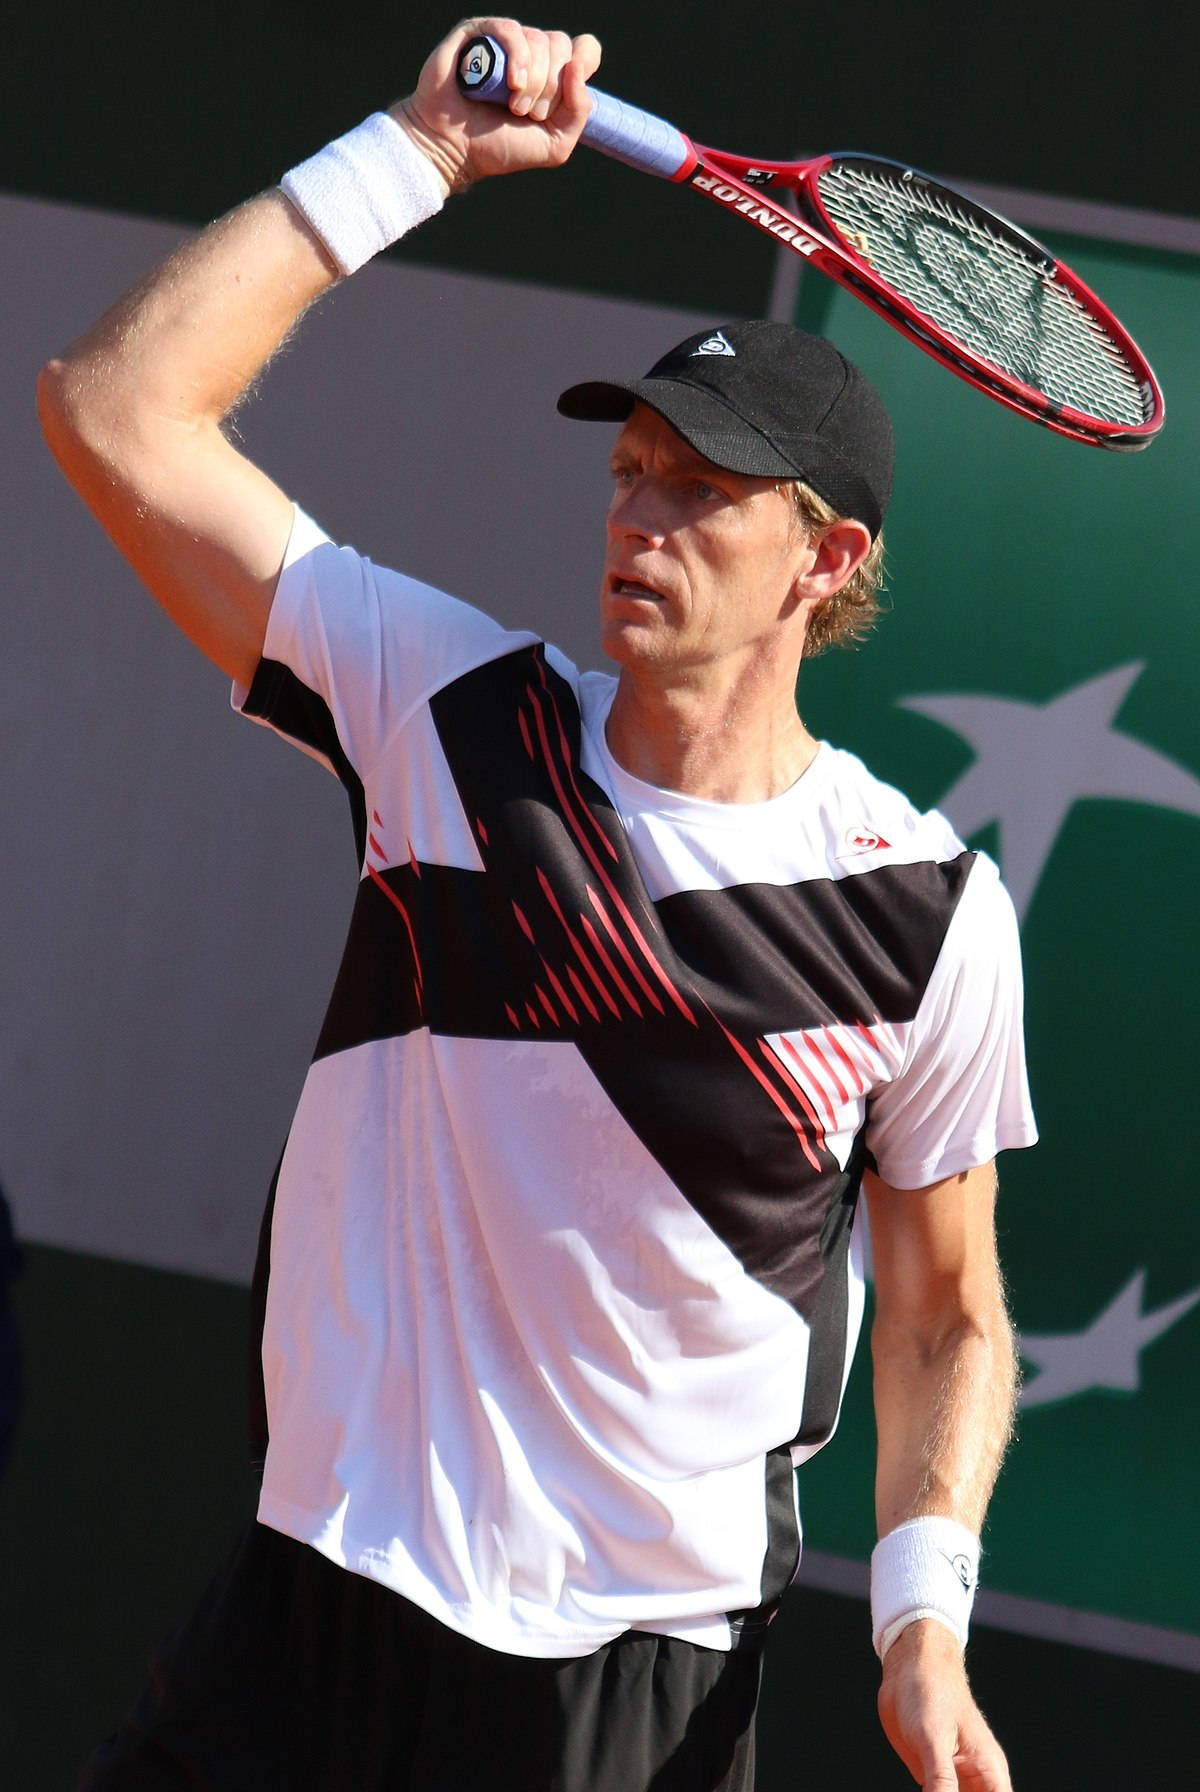 National Tennis Champion, Kevin Anderson, poised for action in-game with his fierce red tennis racket. Wallpaper